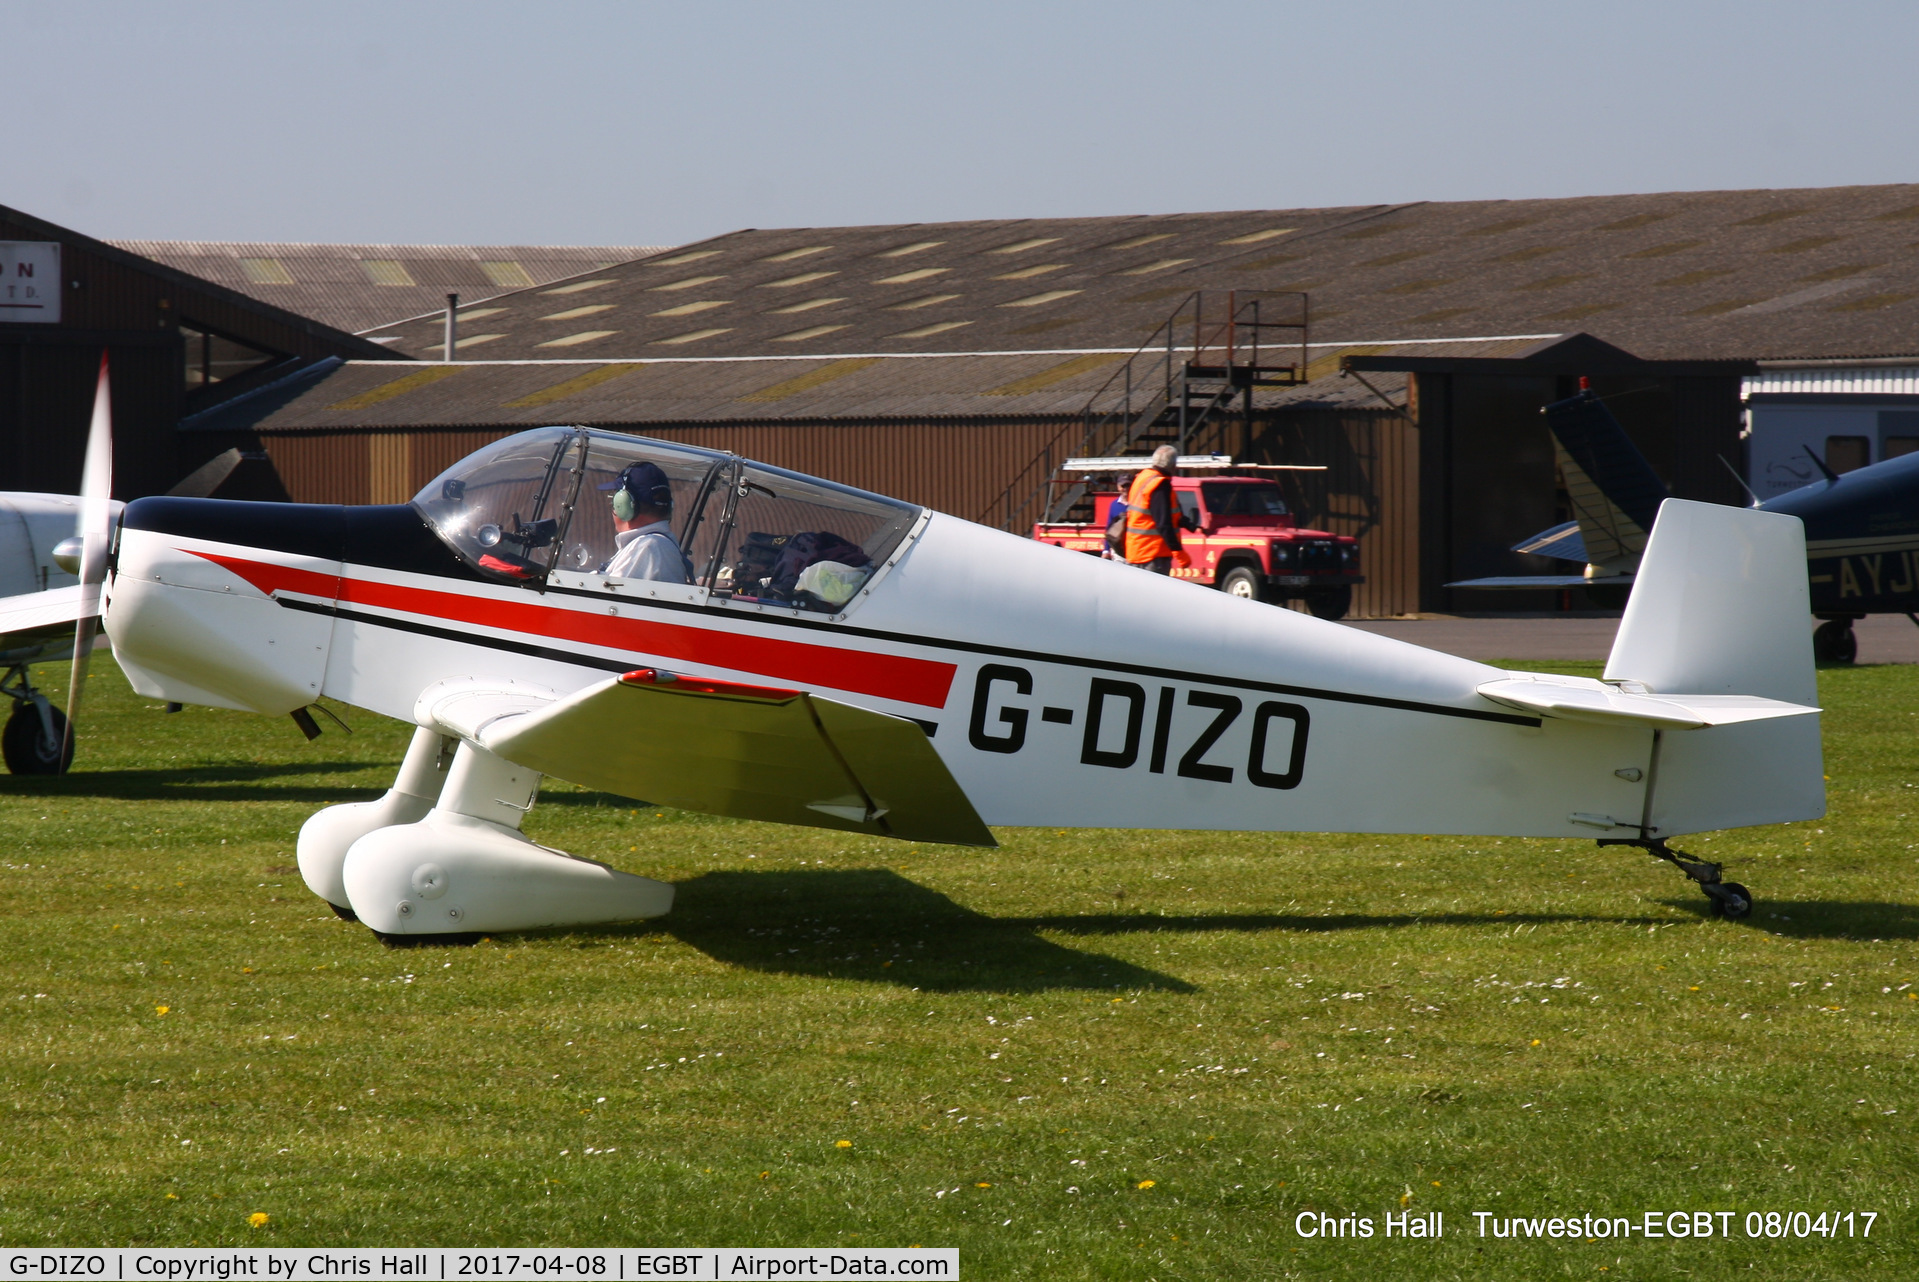 G-DIZO, 1965 Jodel D-120 Paris-Nice C/N 326, at The Beagle Pup 50th anniversary celebration fly in